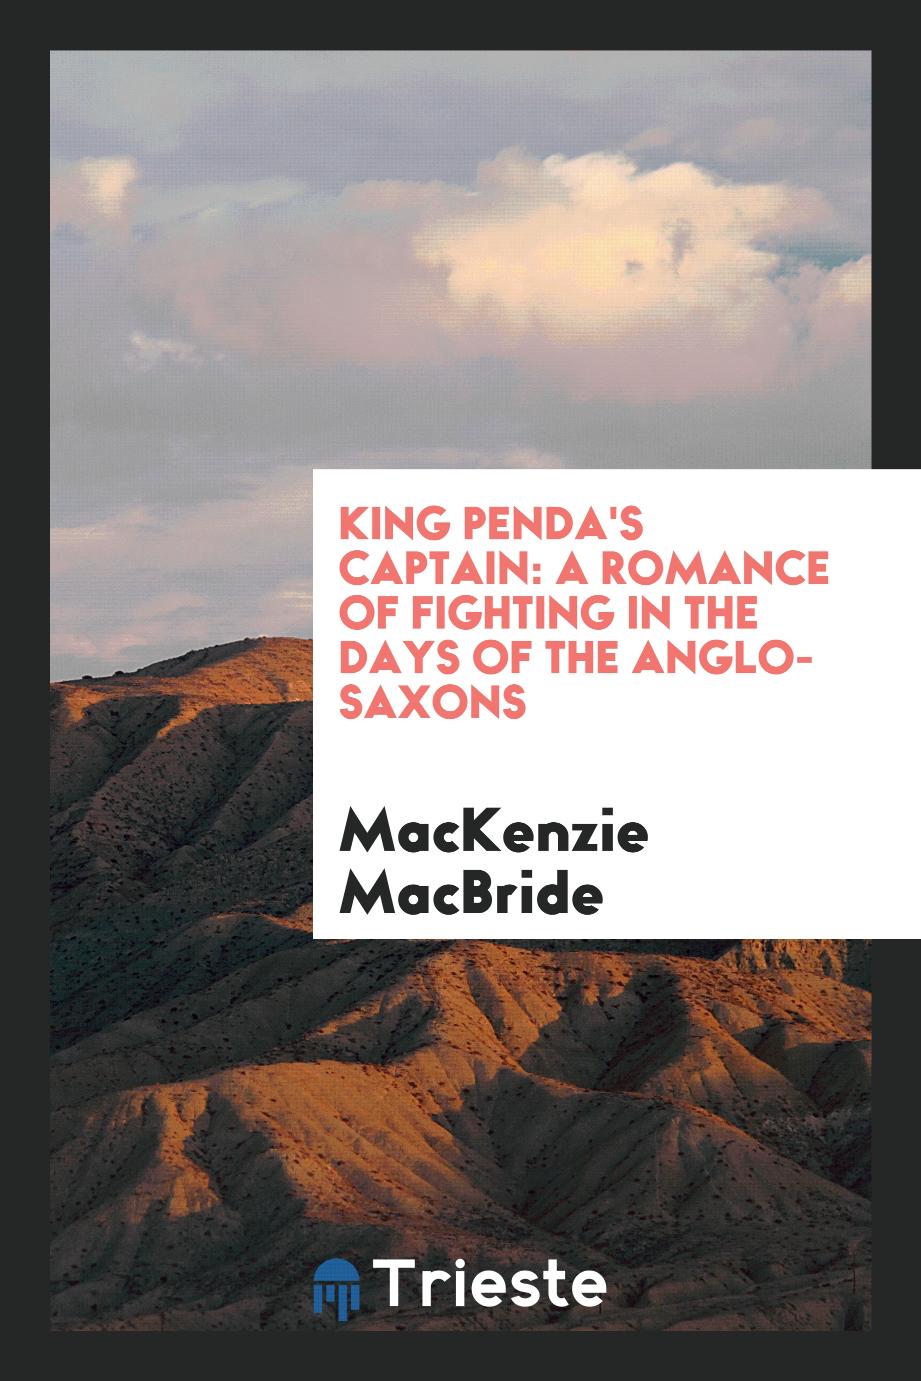 King Penda's captain: a romance of fighting in the days of the Anglo-Saxons